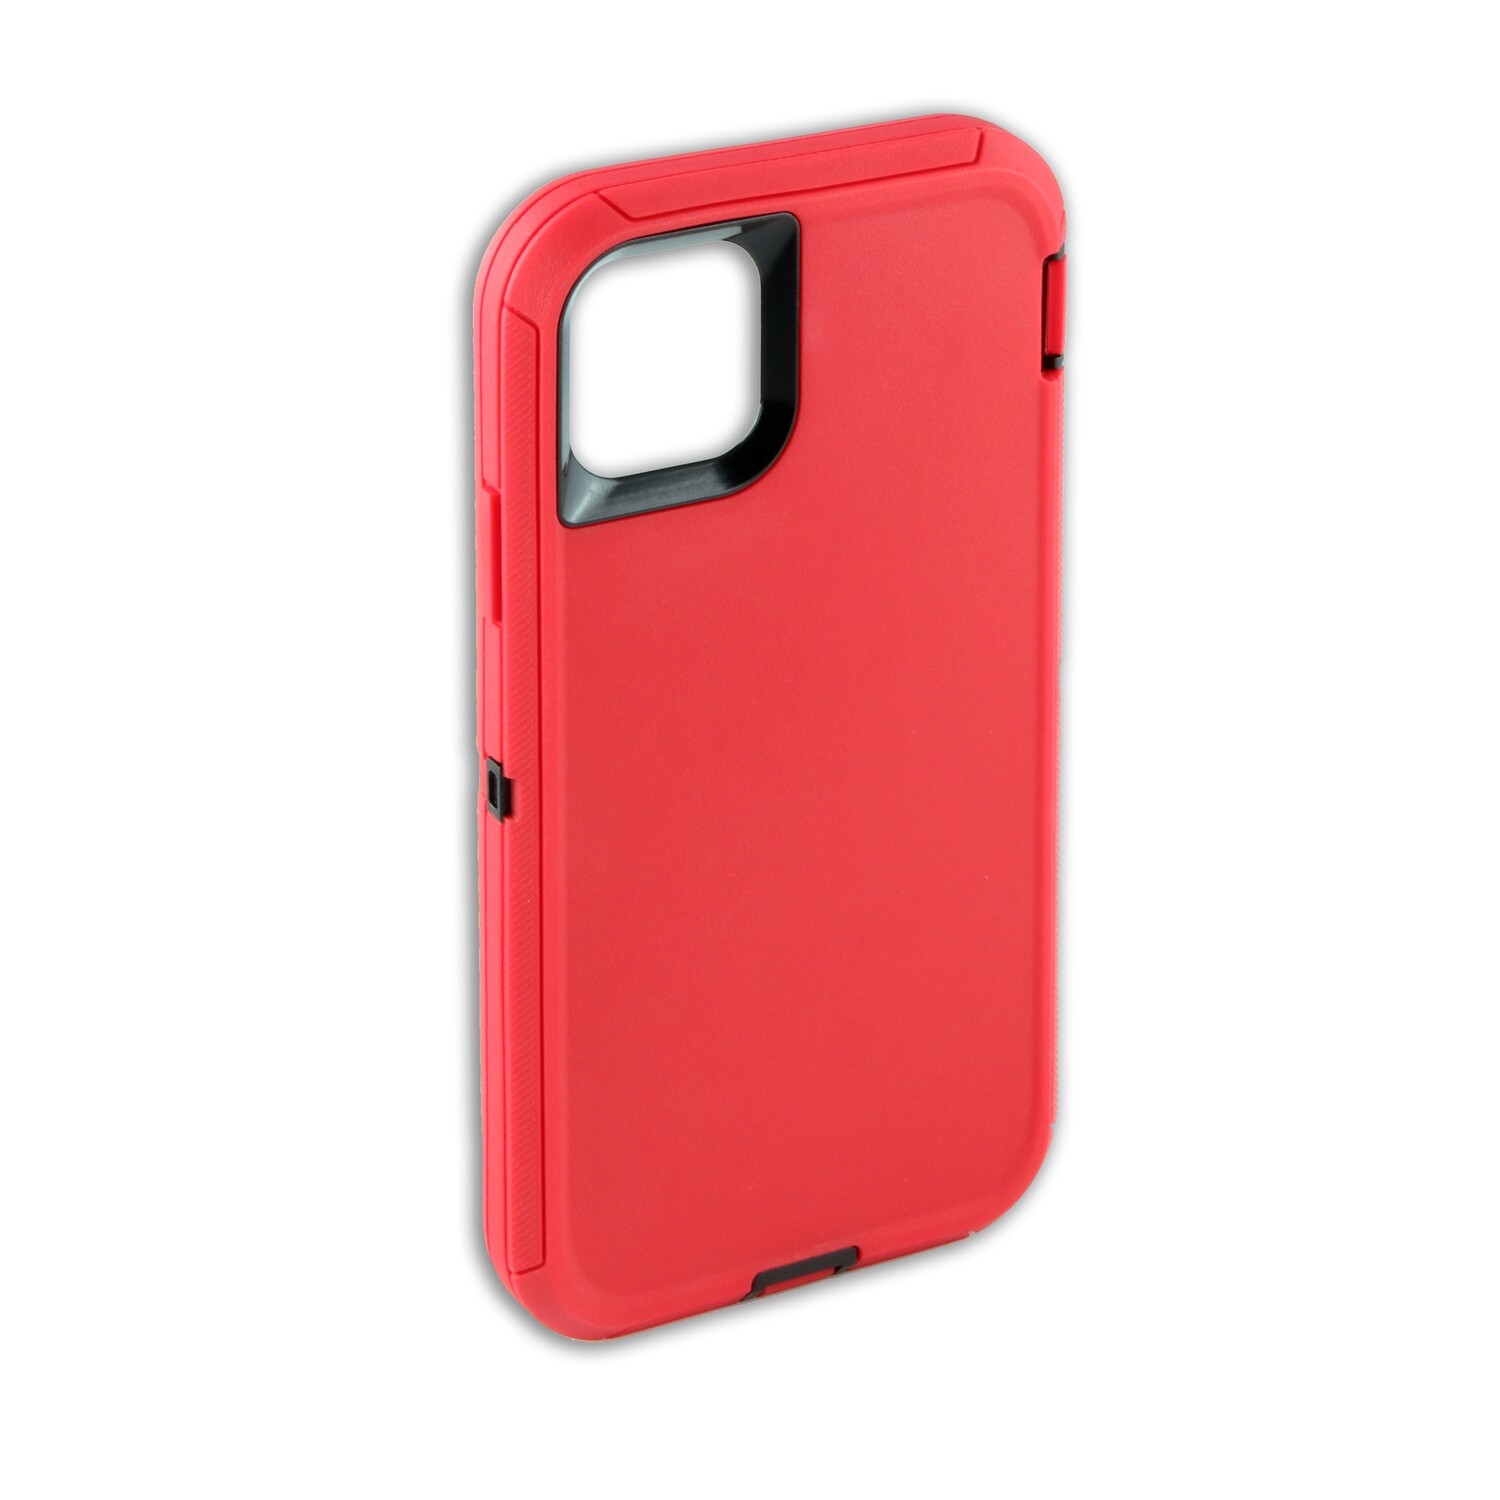 iPhone 11 Pro Max 6.5 Tough Guardian Robot ShockProof Case, Color: Red